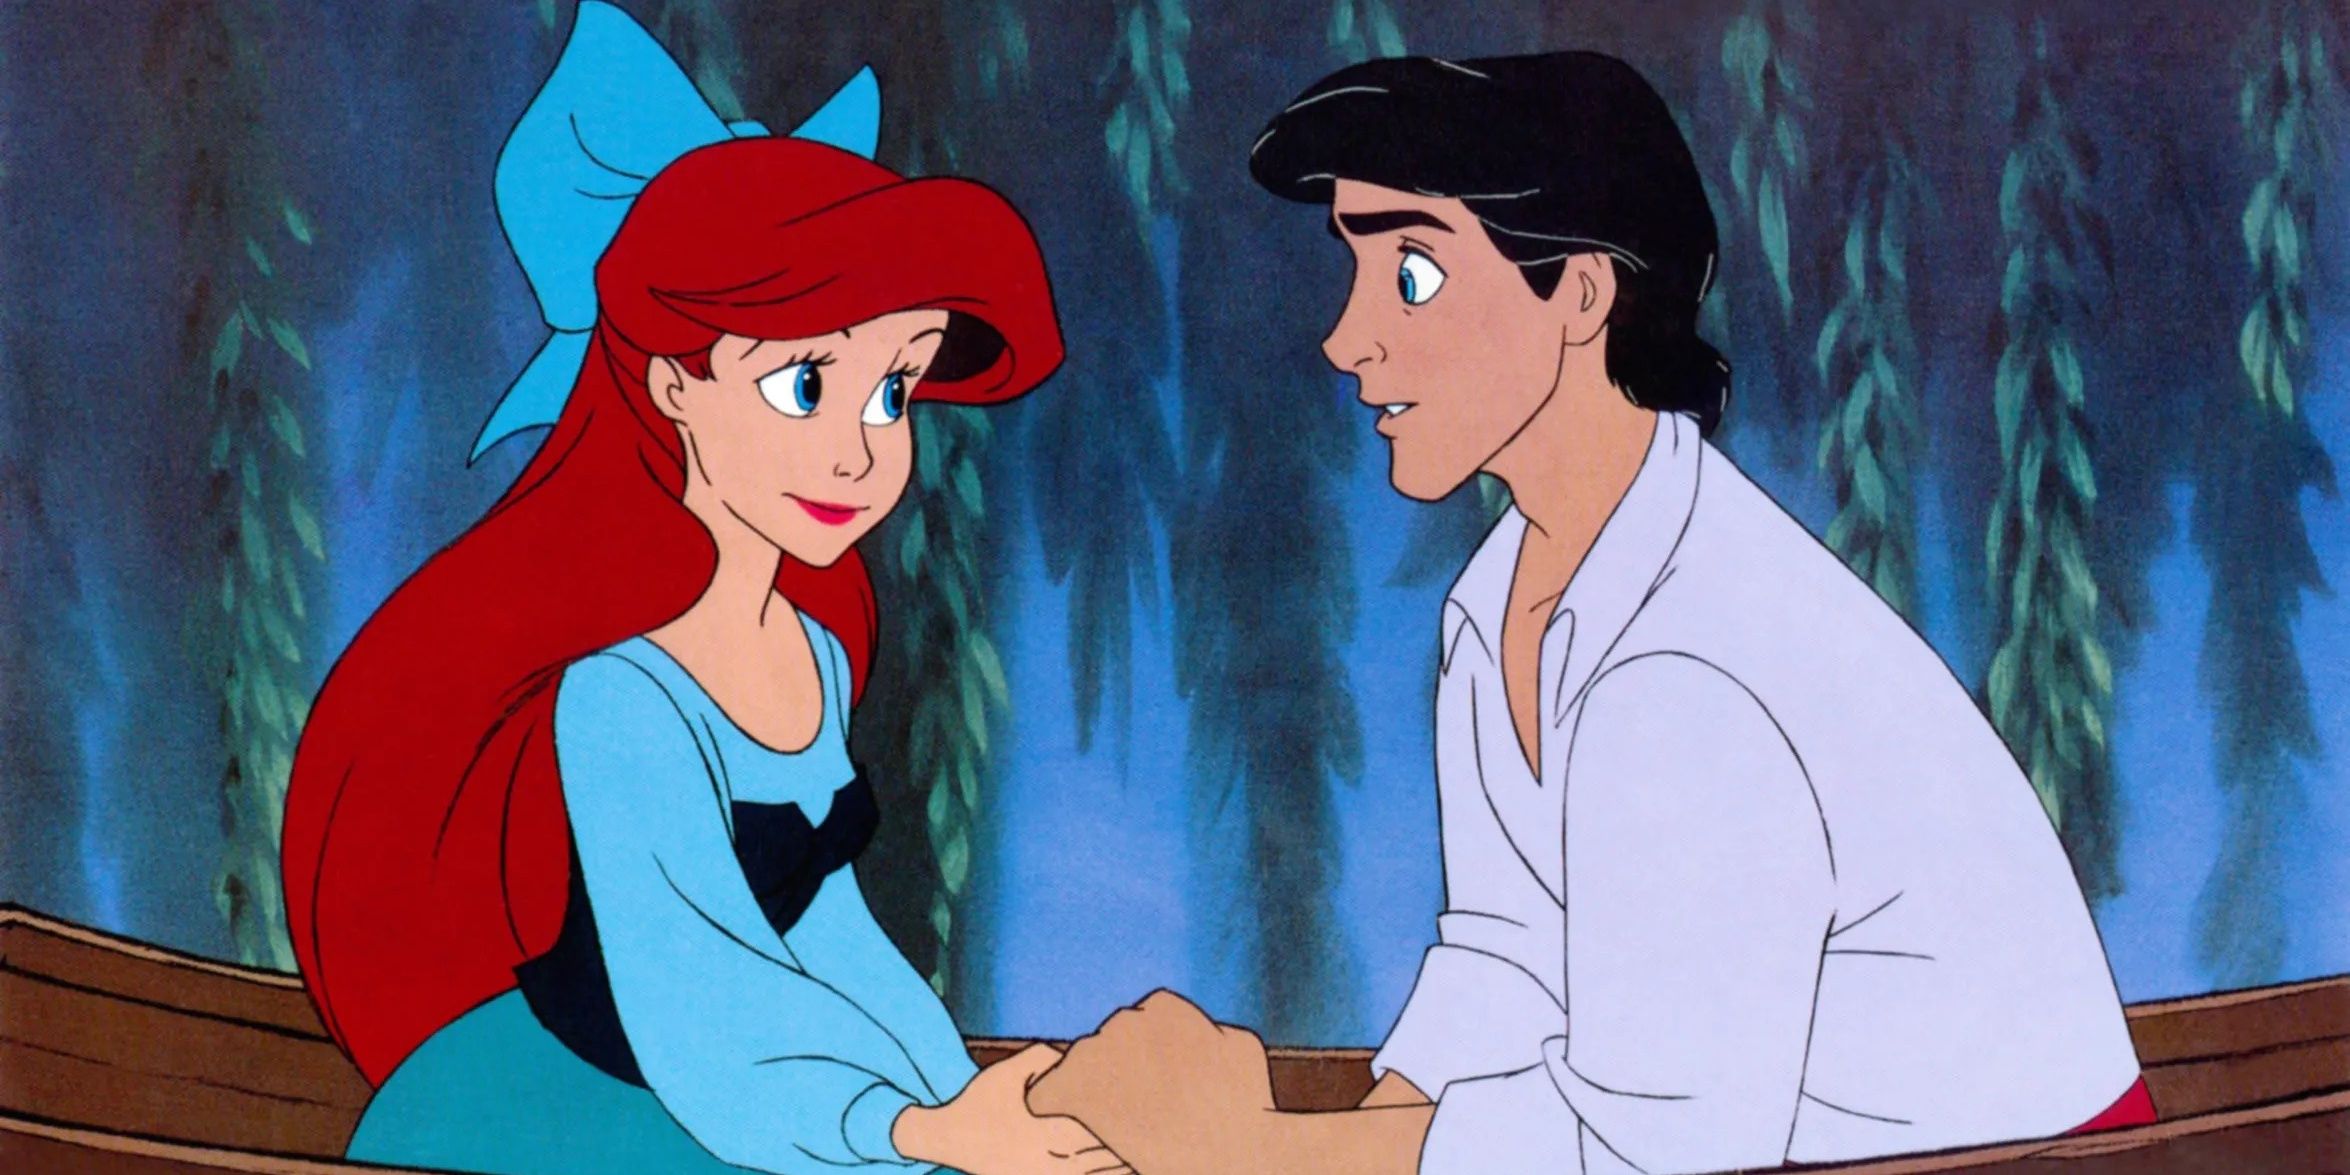 Ariel and the prince holding hands on a boat